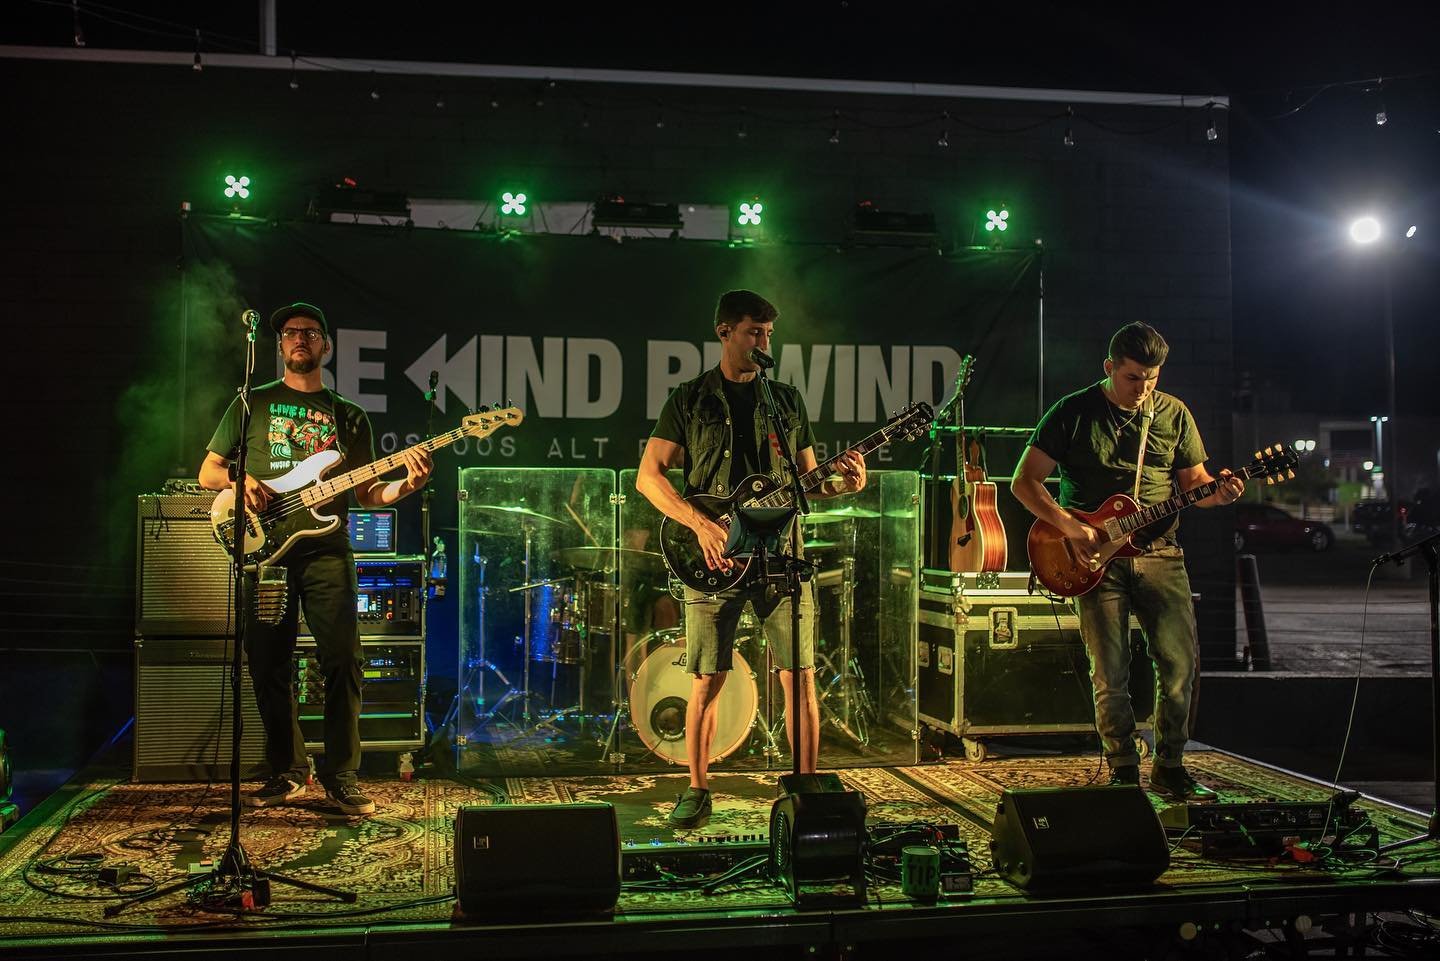 Rock out to nostalgic, '90s radio hits with Be Kind Rewind at The Green Door on Friday night.